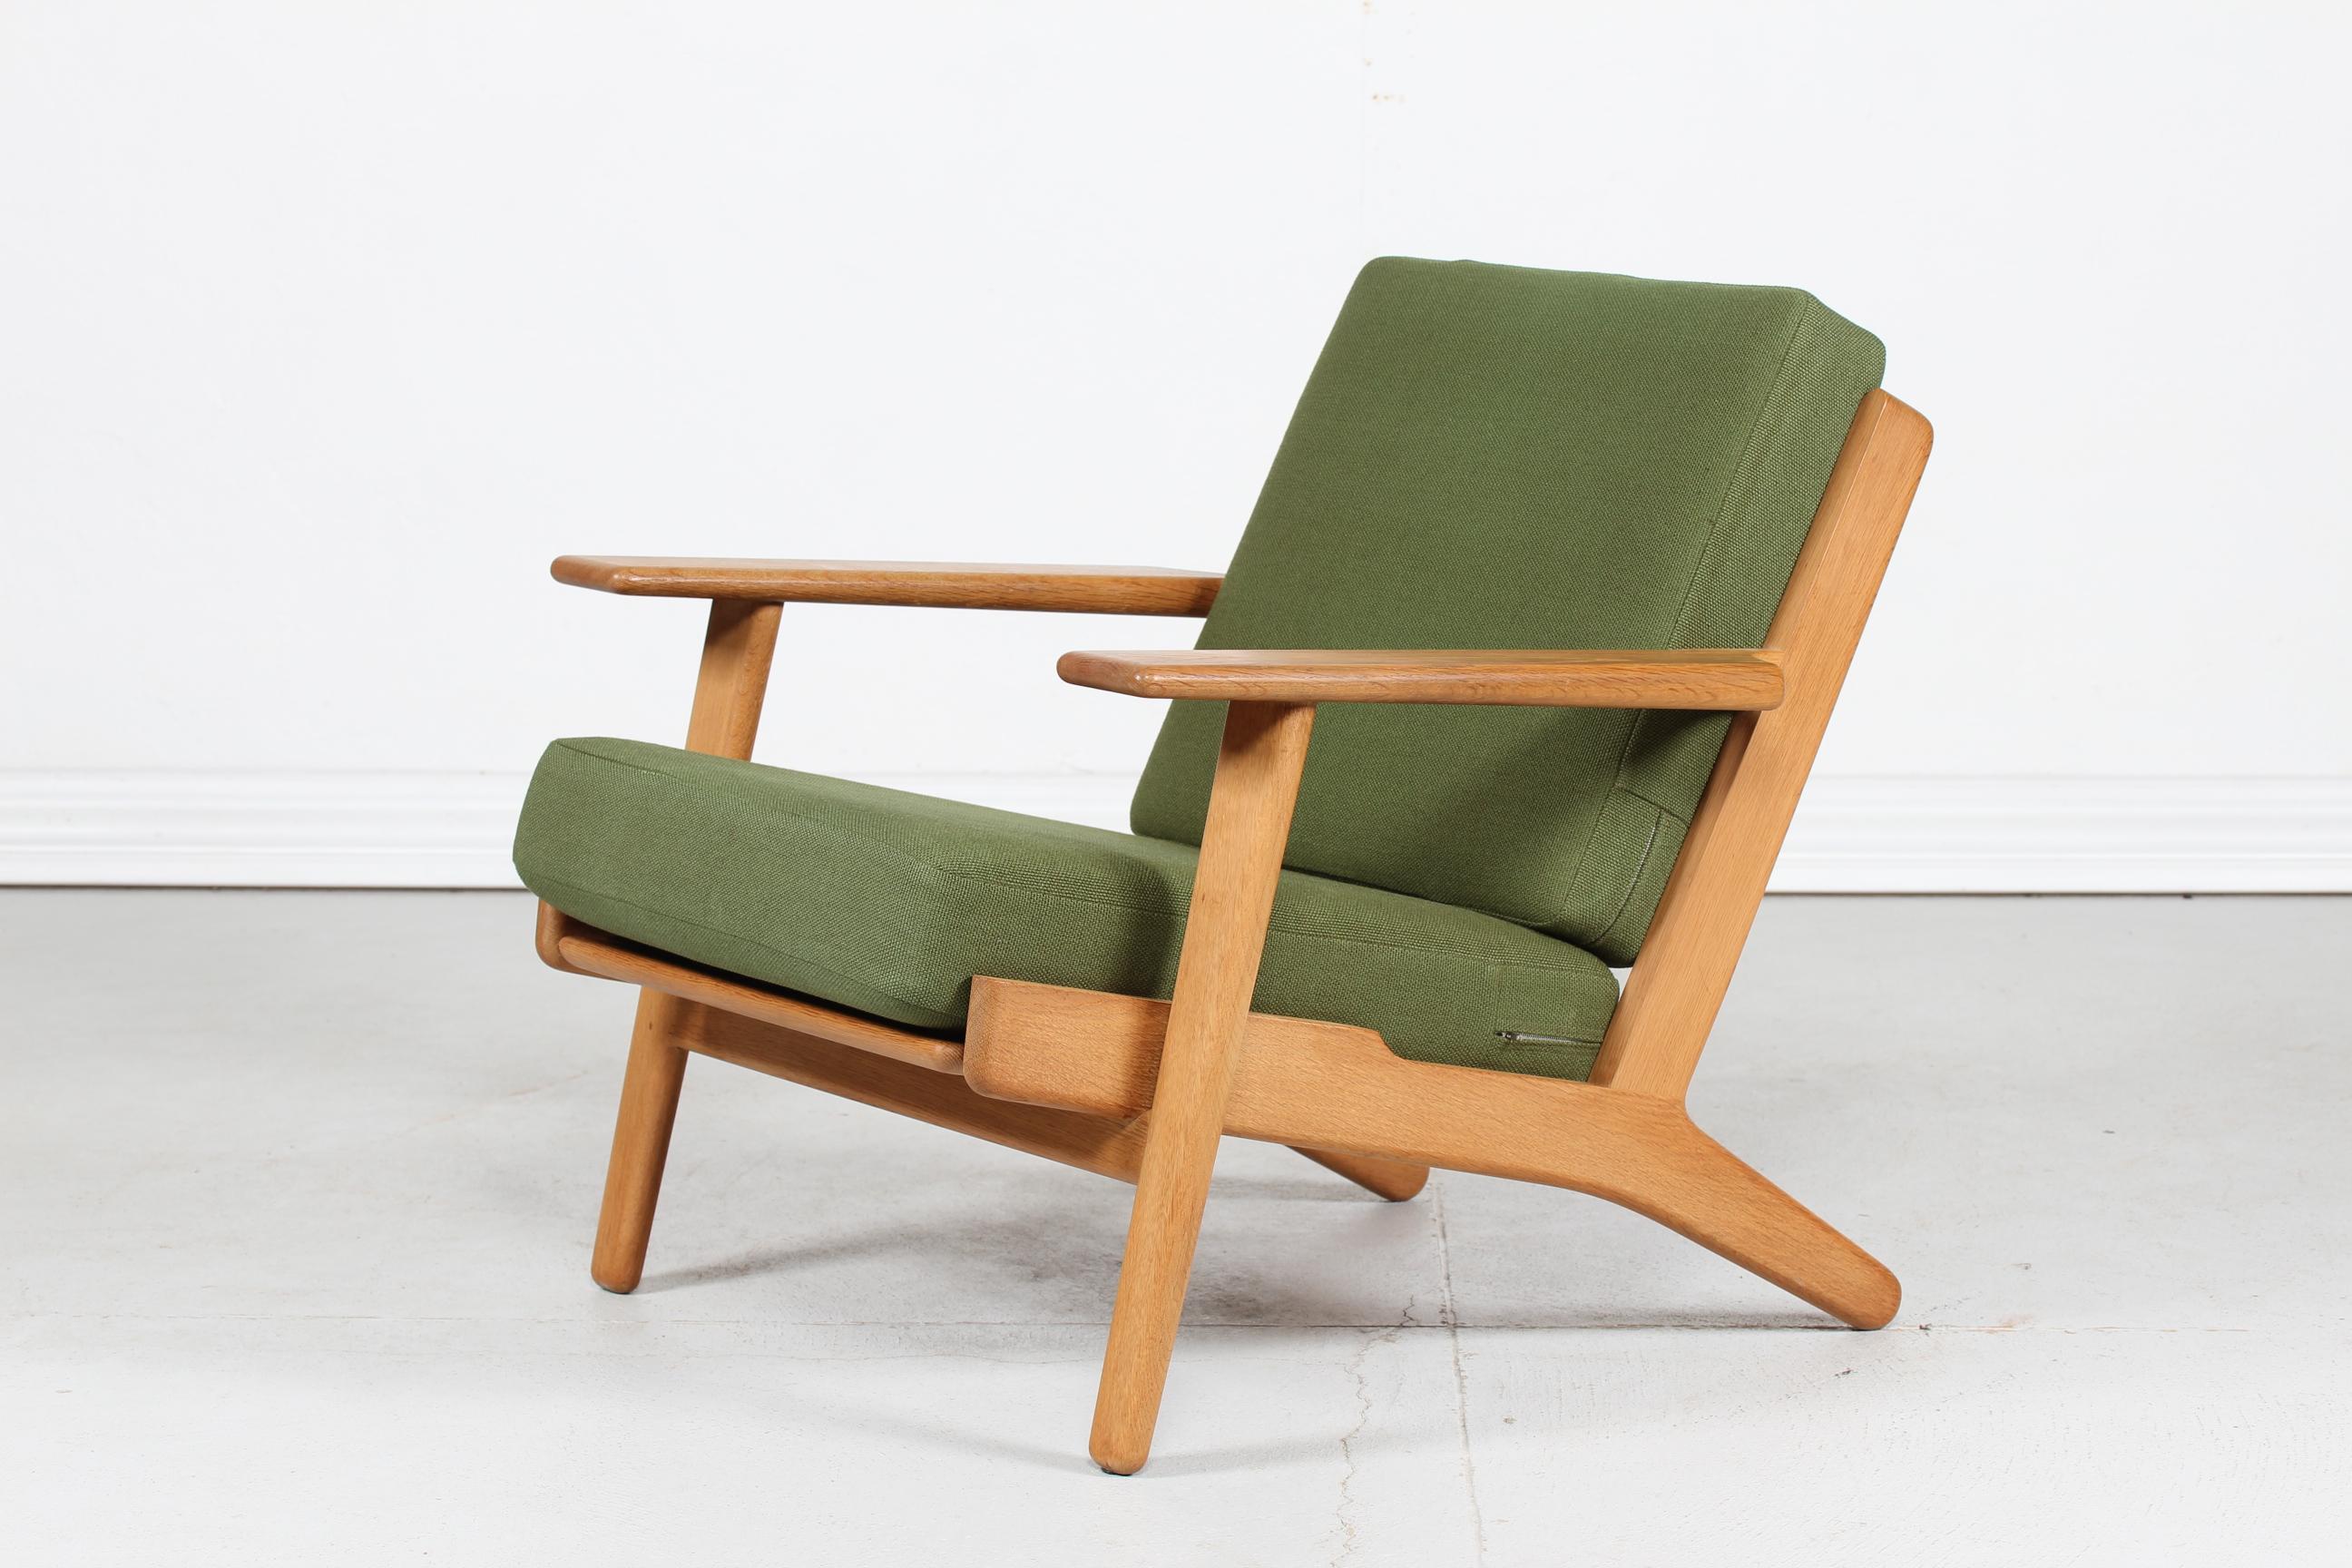 Lounge chair model GE 290 by the danish designer Hans J. Wegner in 1953
This chair is manufactored in the 1970s of genuine oak with good patina and feature cushions with green wool fabric
The chair remain in very good condition with great patina